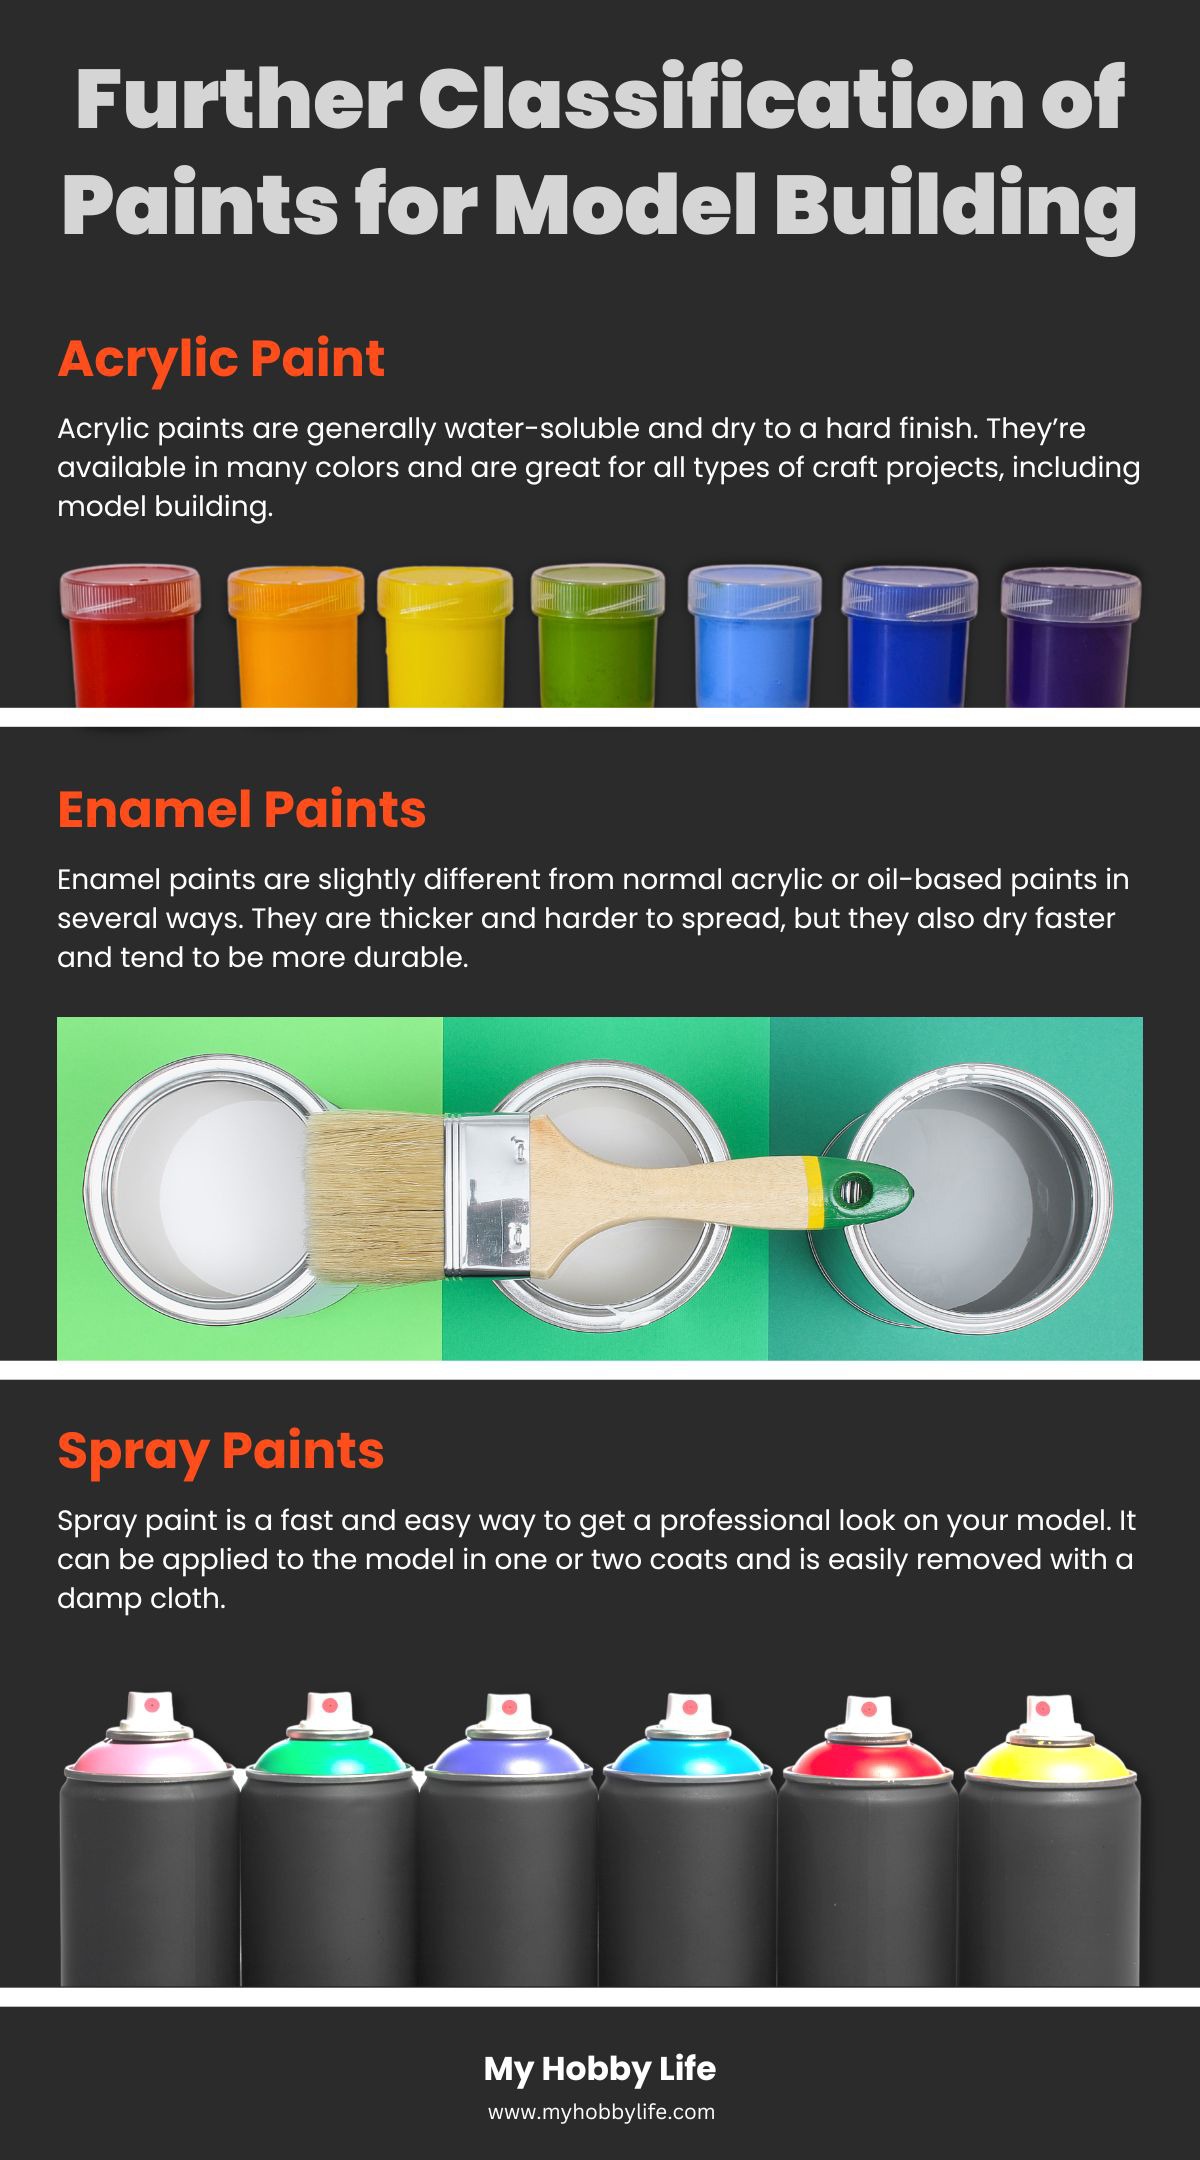 Further Classification of Paints for Model Building